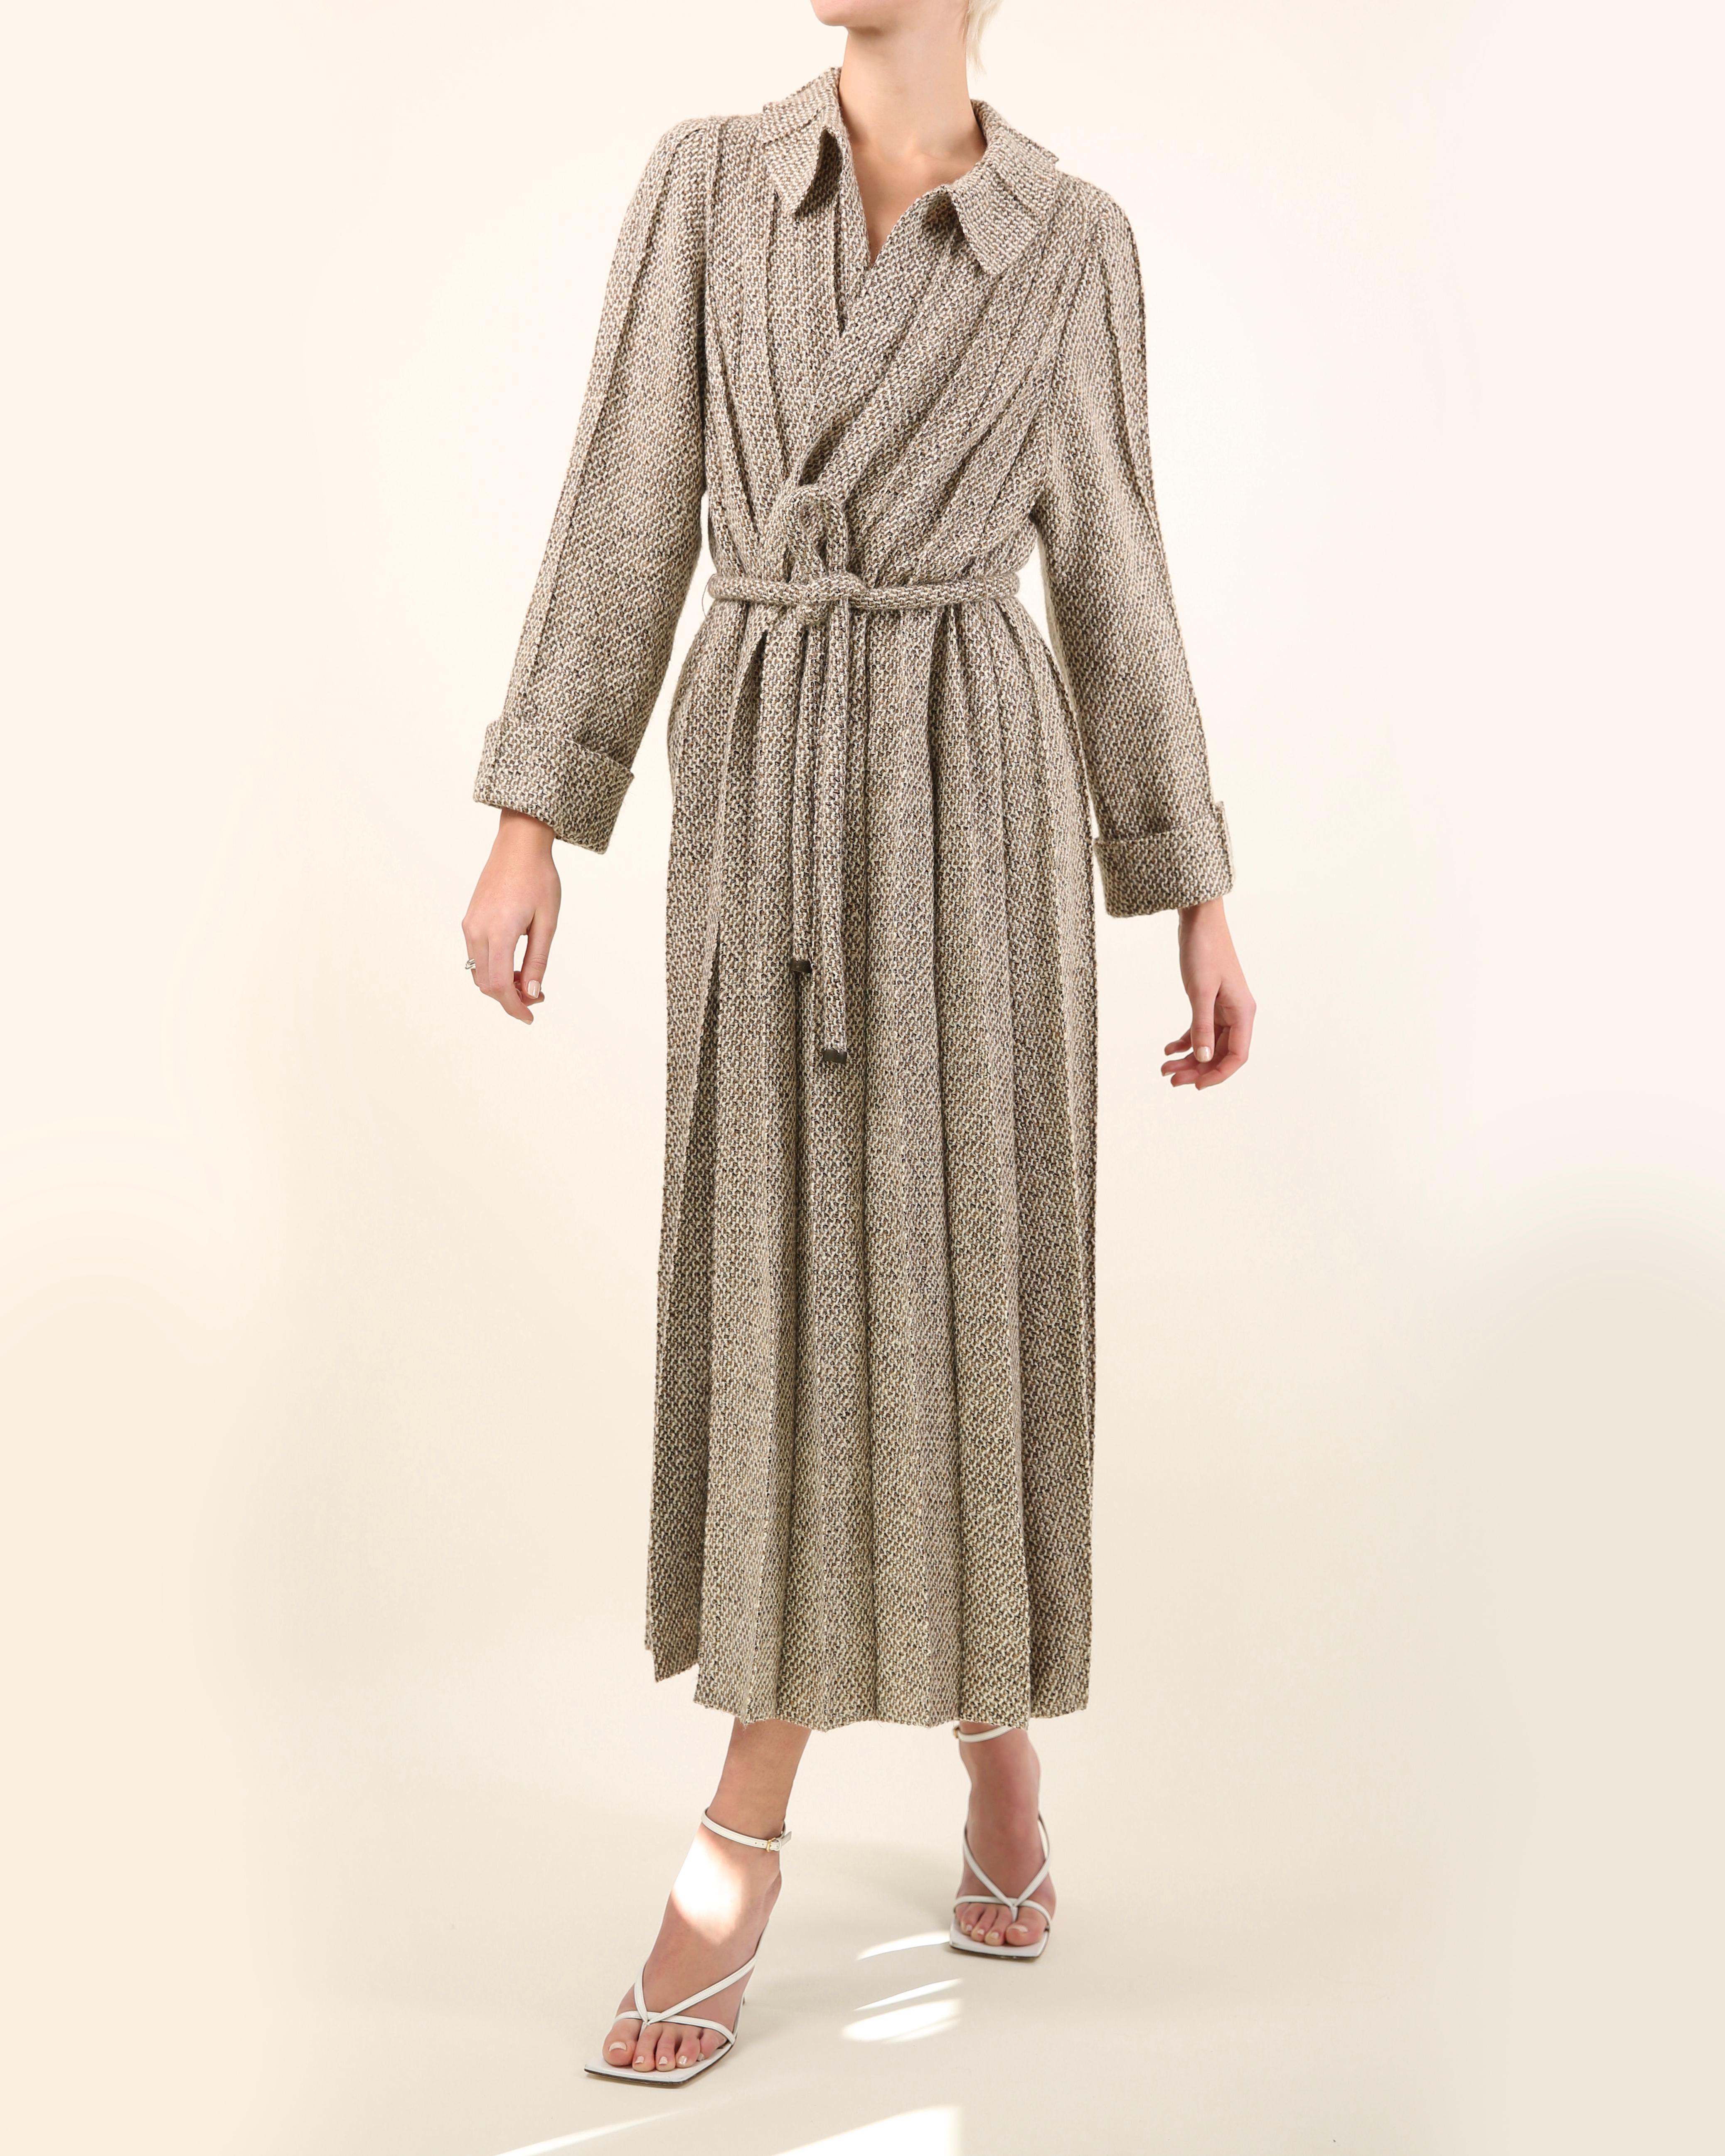 Women's Chanel Fall 1998 brown & white tweed wool long pleated maxi jacket dress coat   For Sale